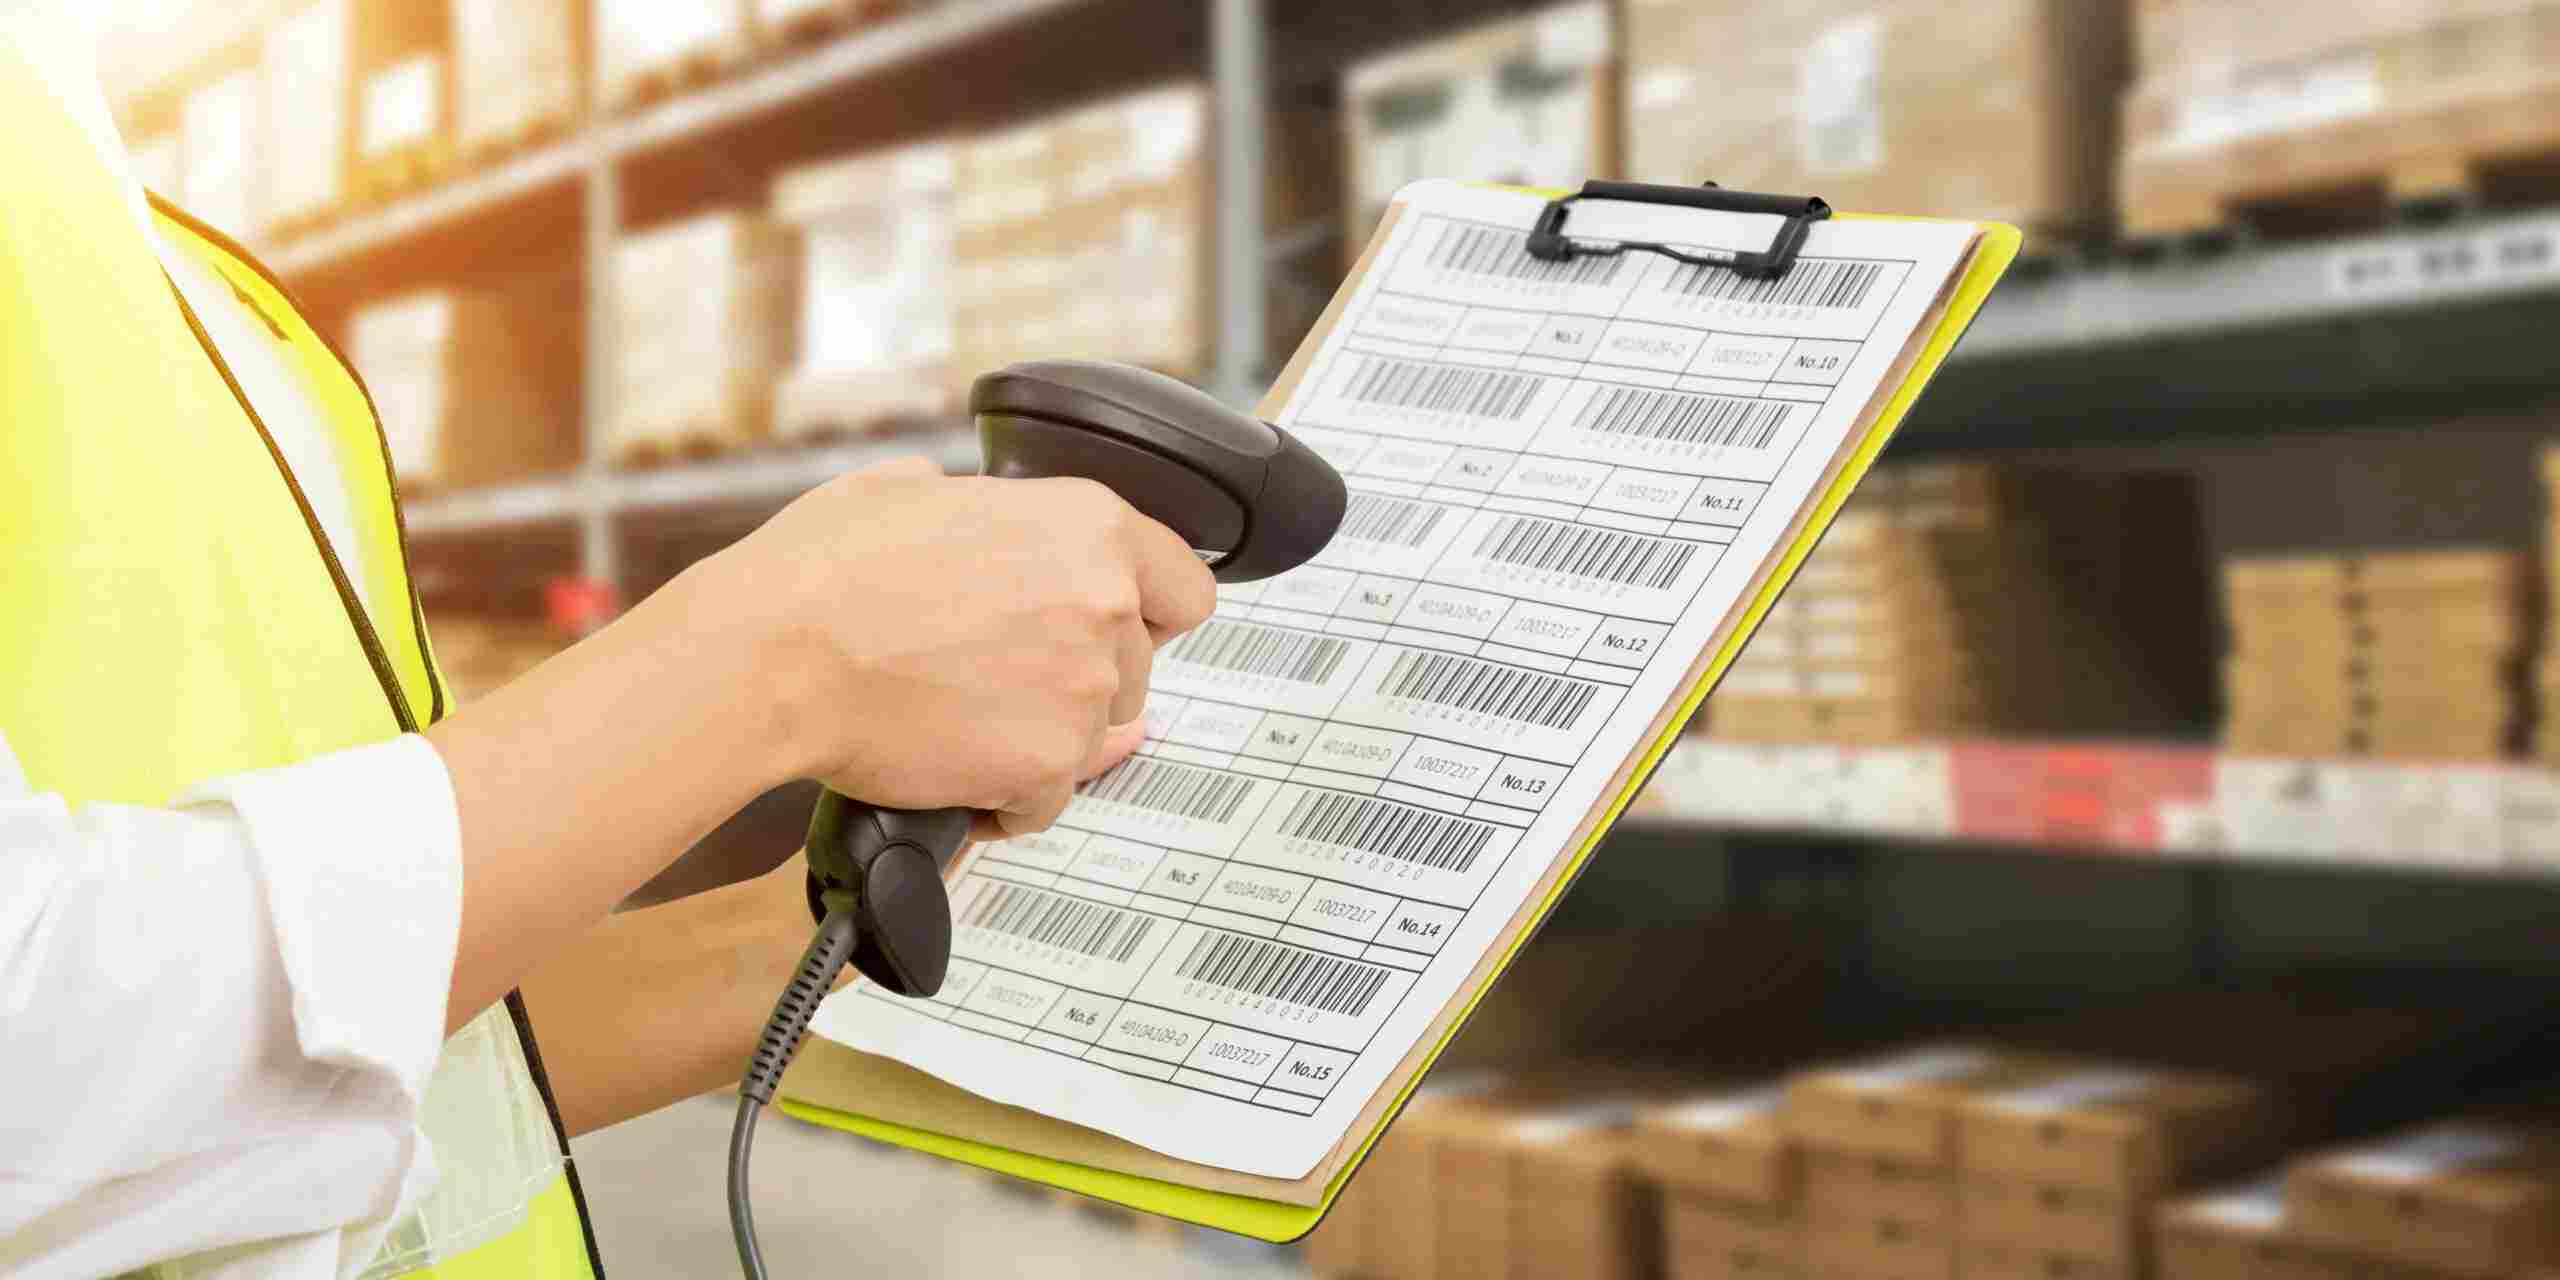 Benefits Of Using A Barcode Scanner